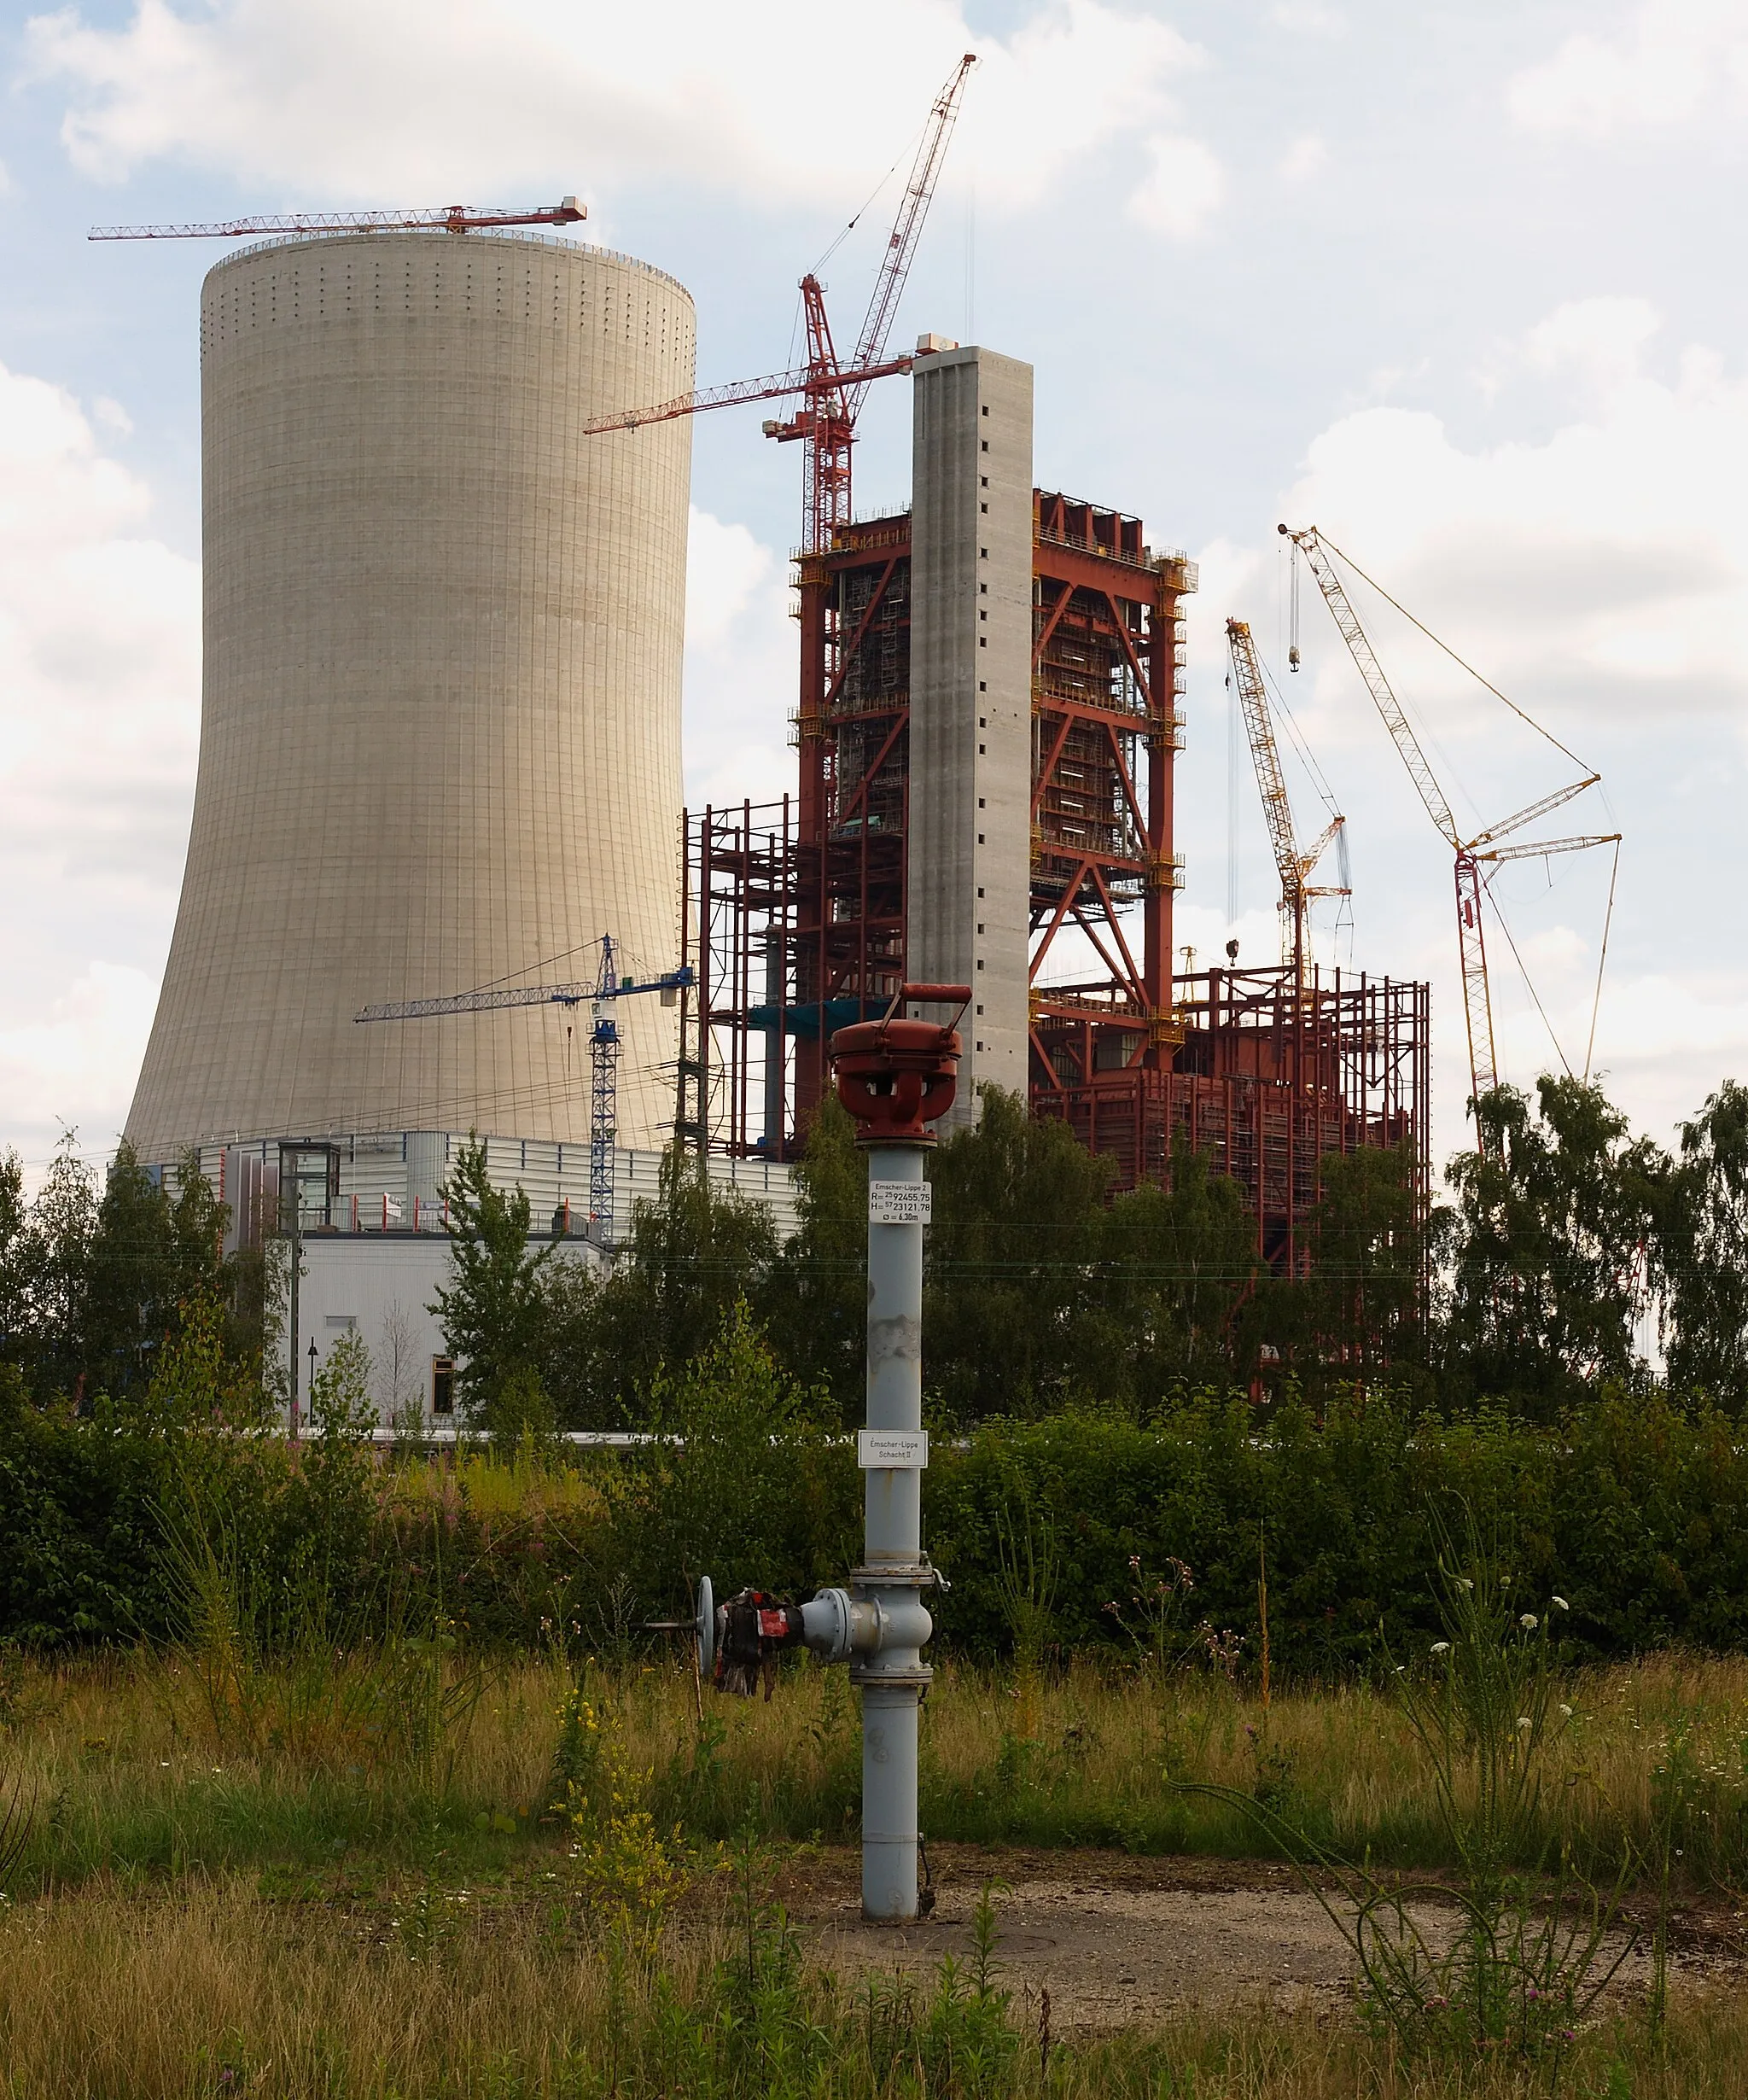 Photo showing: Coal power plant in Datteln (Germany) at the Dortmund-Ems-Kanal - New section under construction. In front the former pit of coal mine Emscher-Lippe